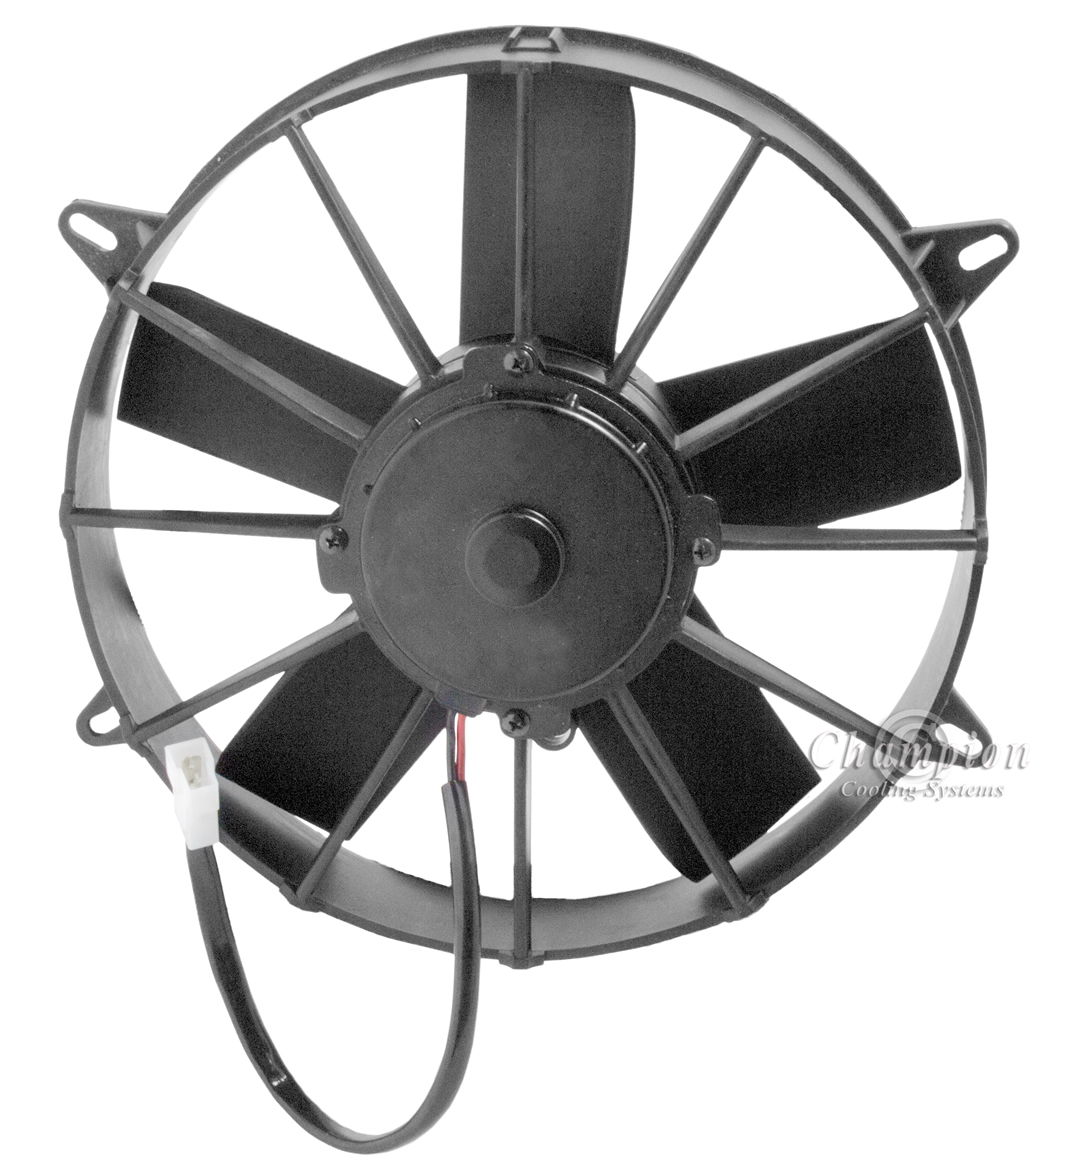 Champion Cooling Systems 11 inch paddle fans for Champion Radiators